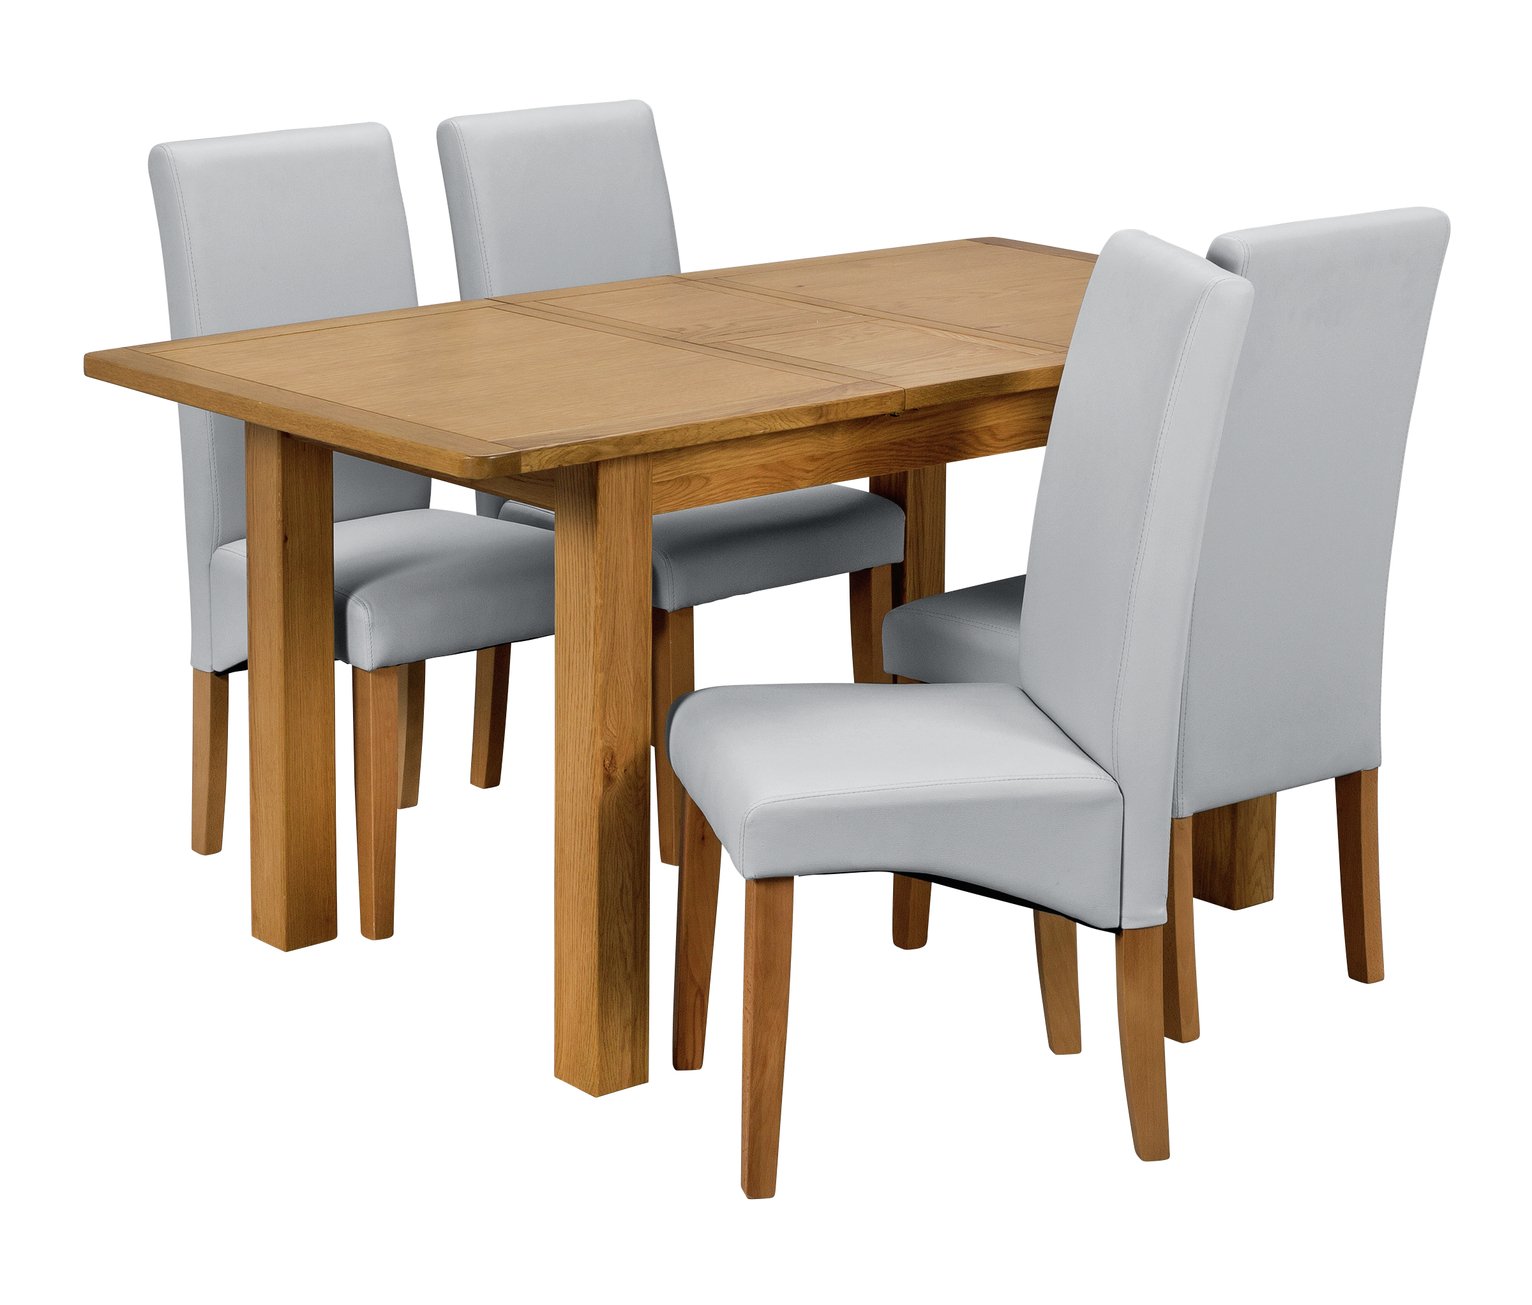 Argos Home Ashwell Extendable Table and 4 Chairs - Grey